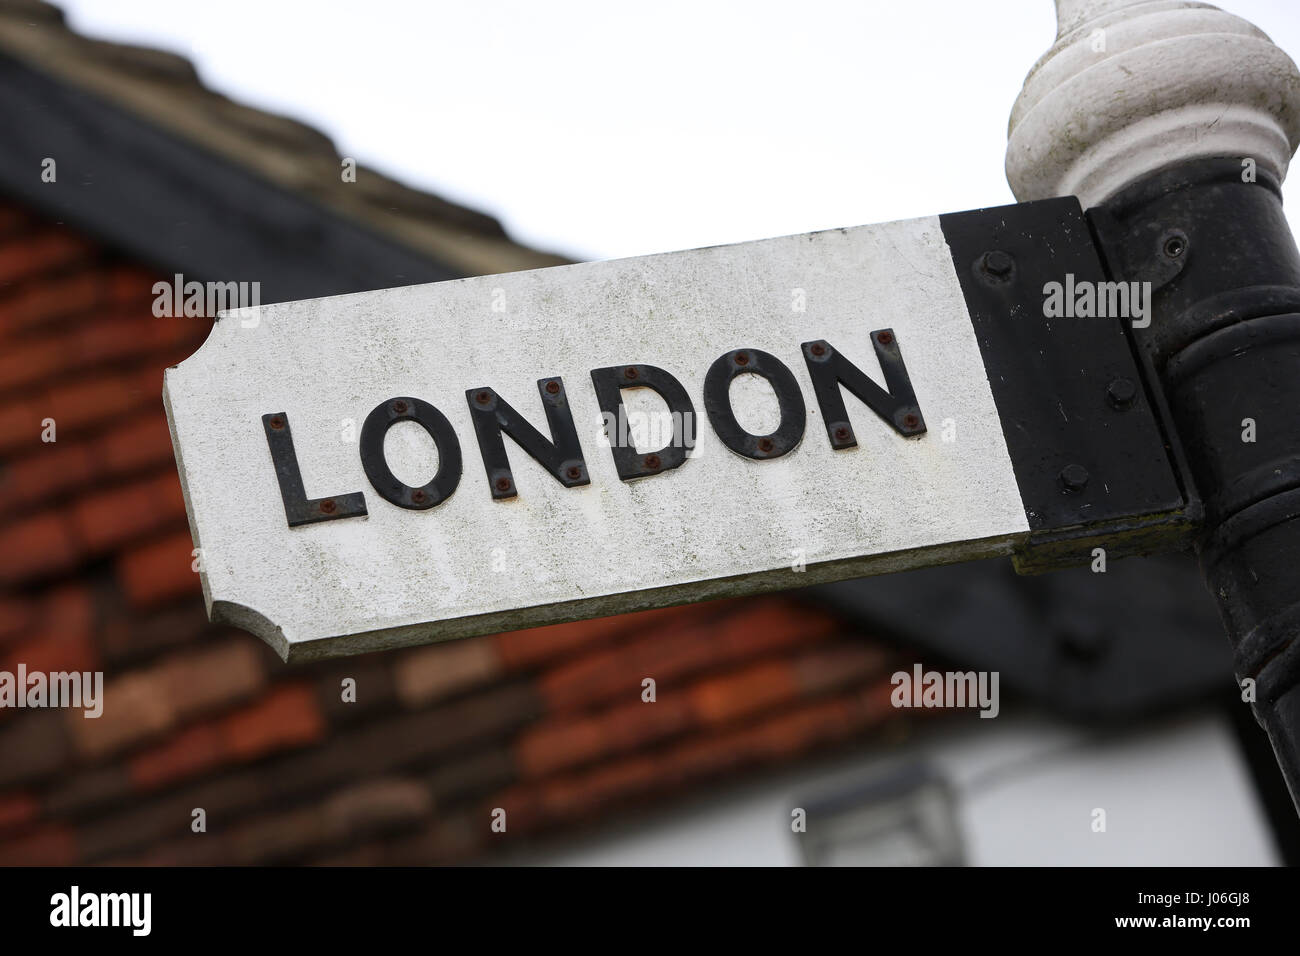 Directions to London on a road sign in Balcombe, East Sussex, UK. Stock Photo